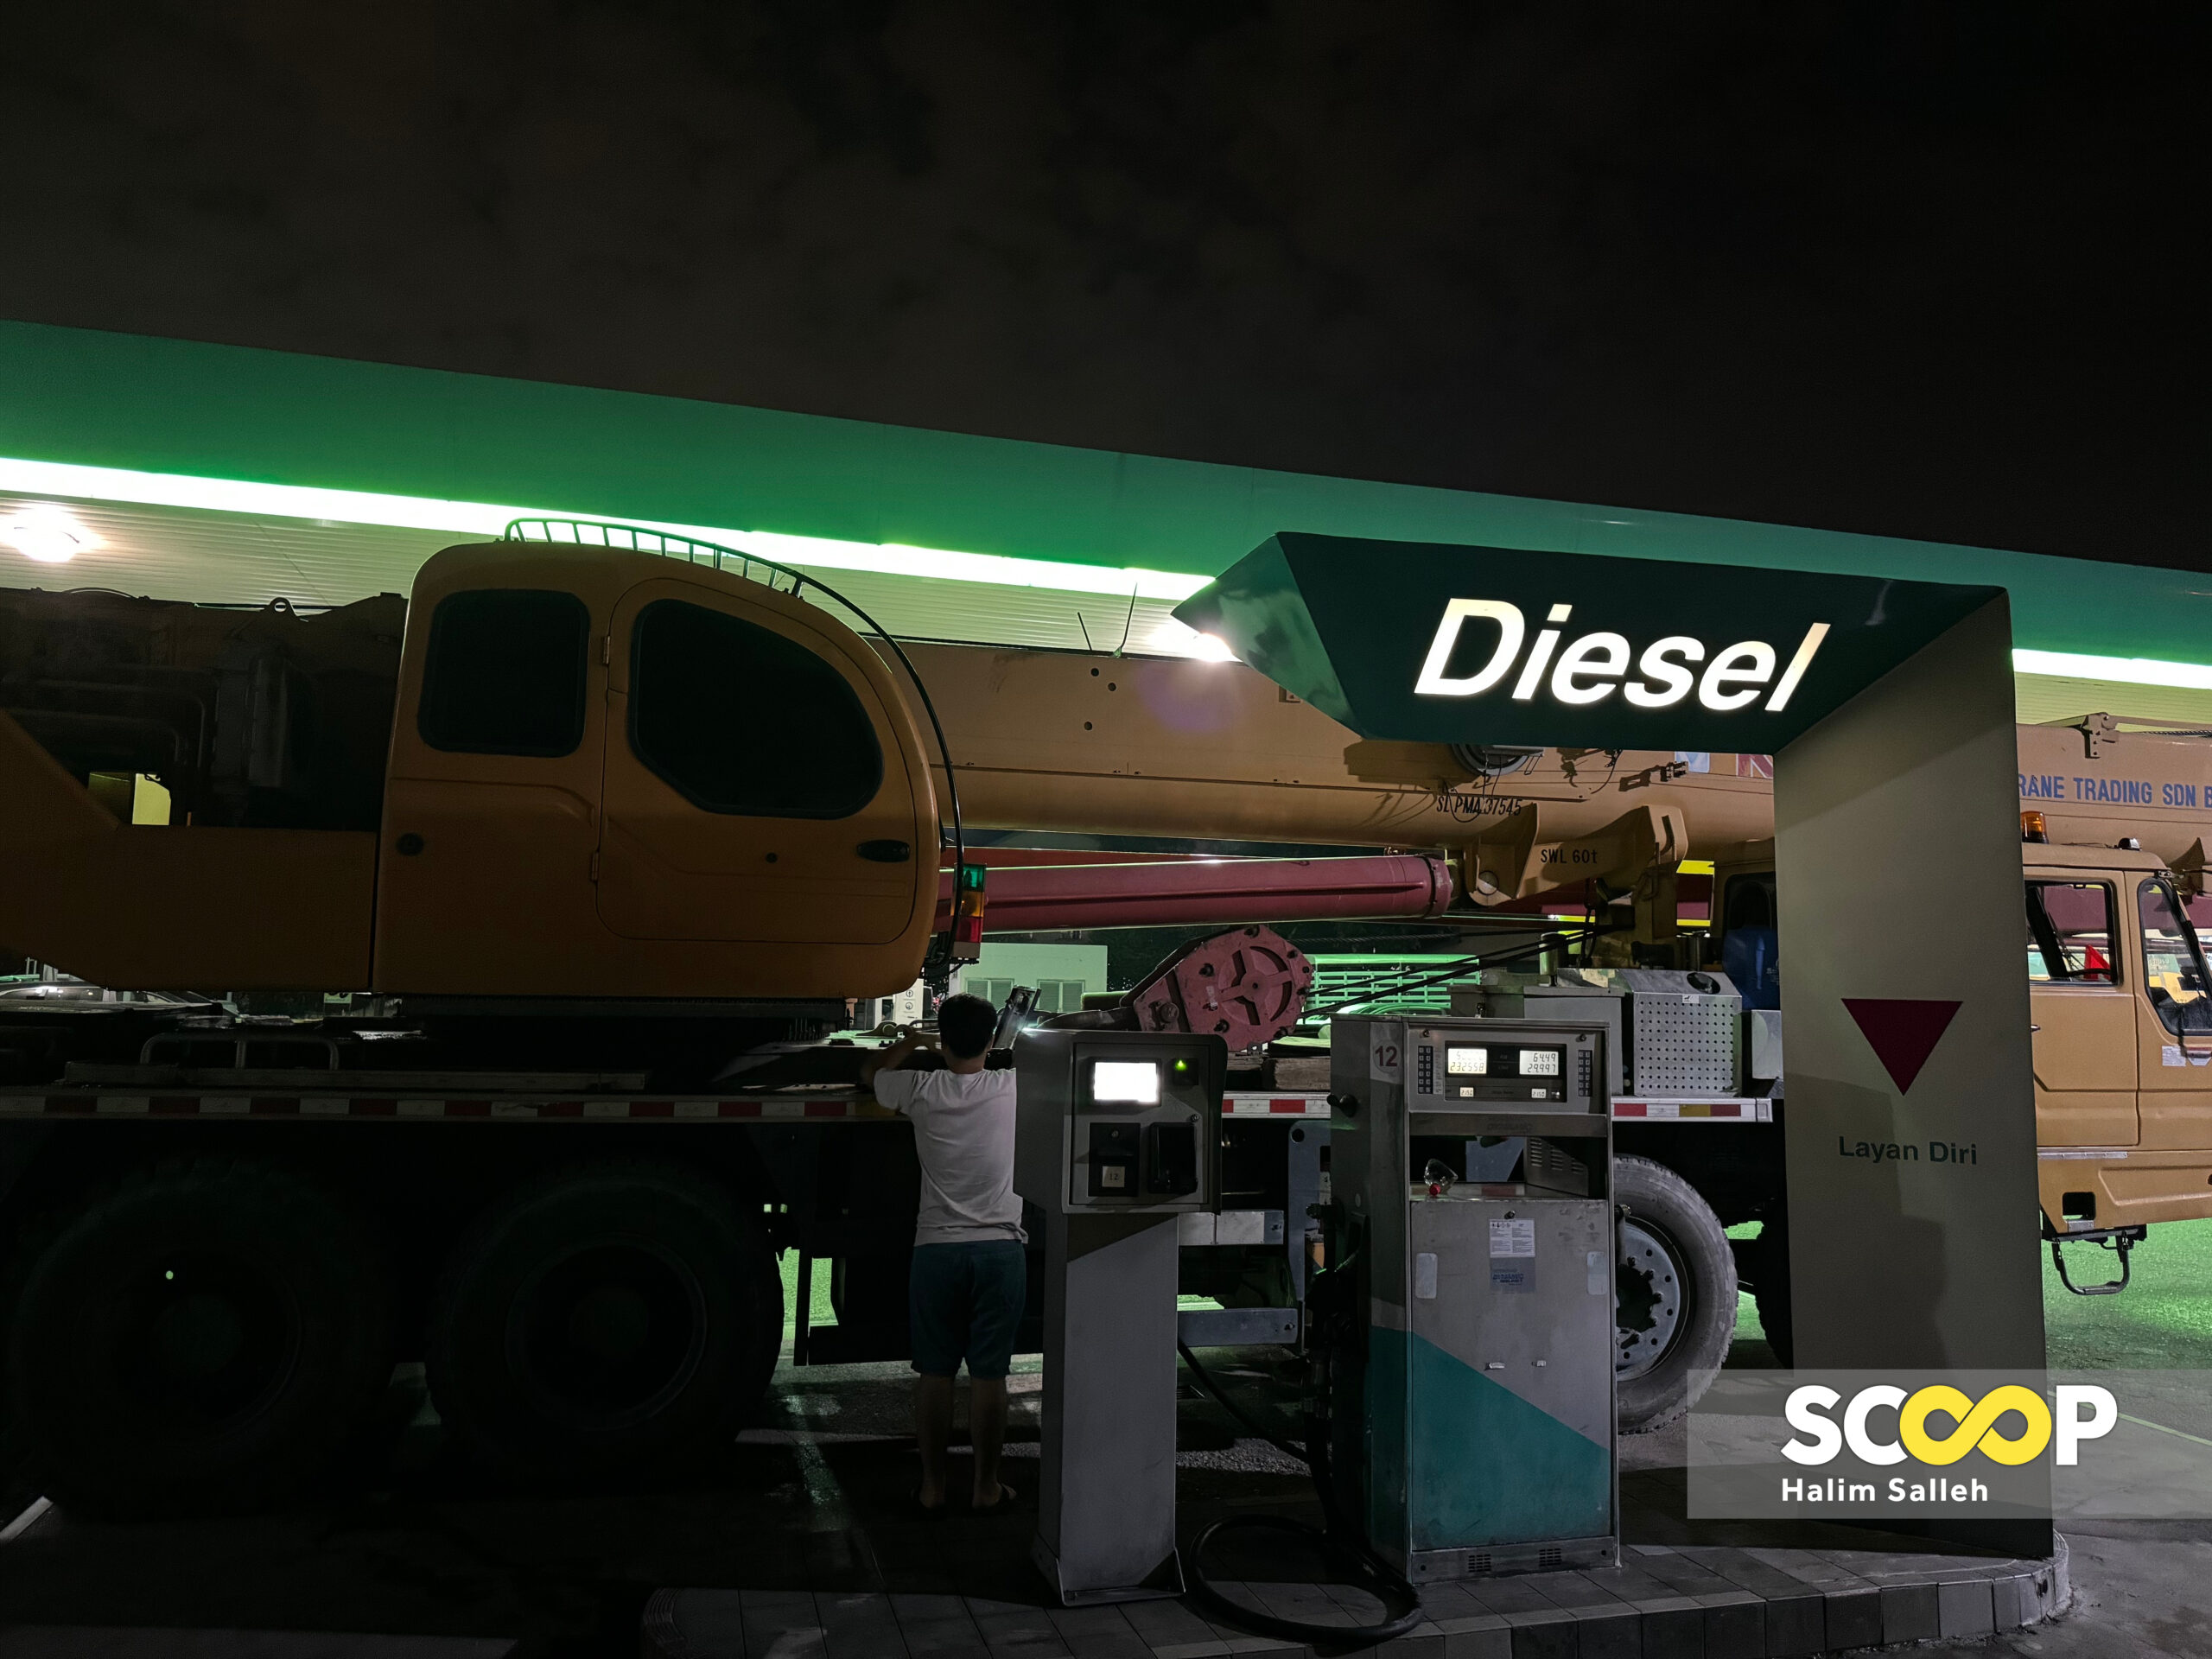 [UPDATED] SKDS 2.0: refund applications for diesel purchases open from July 1